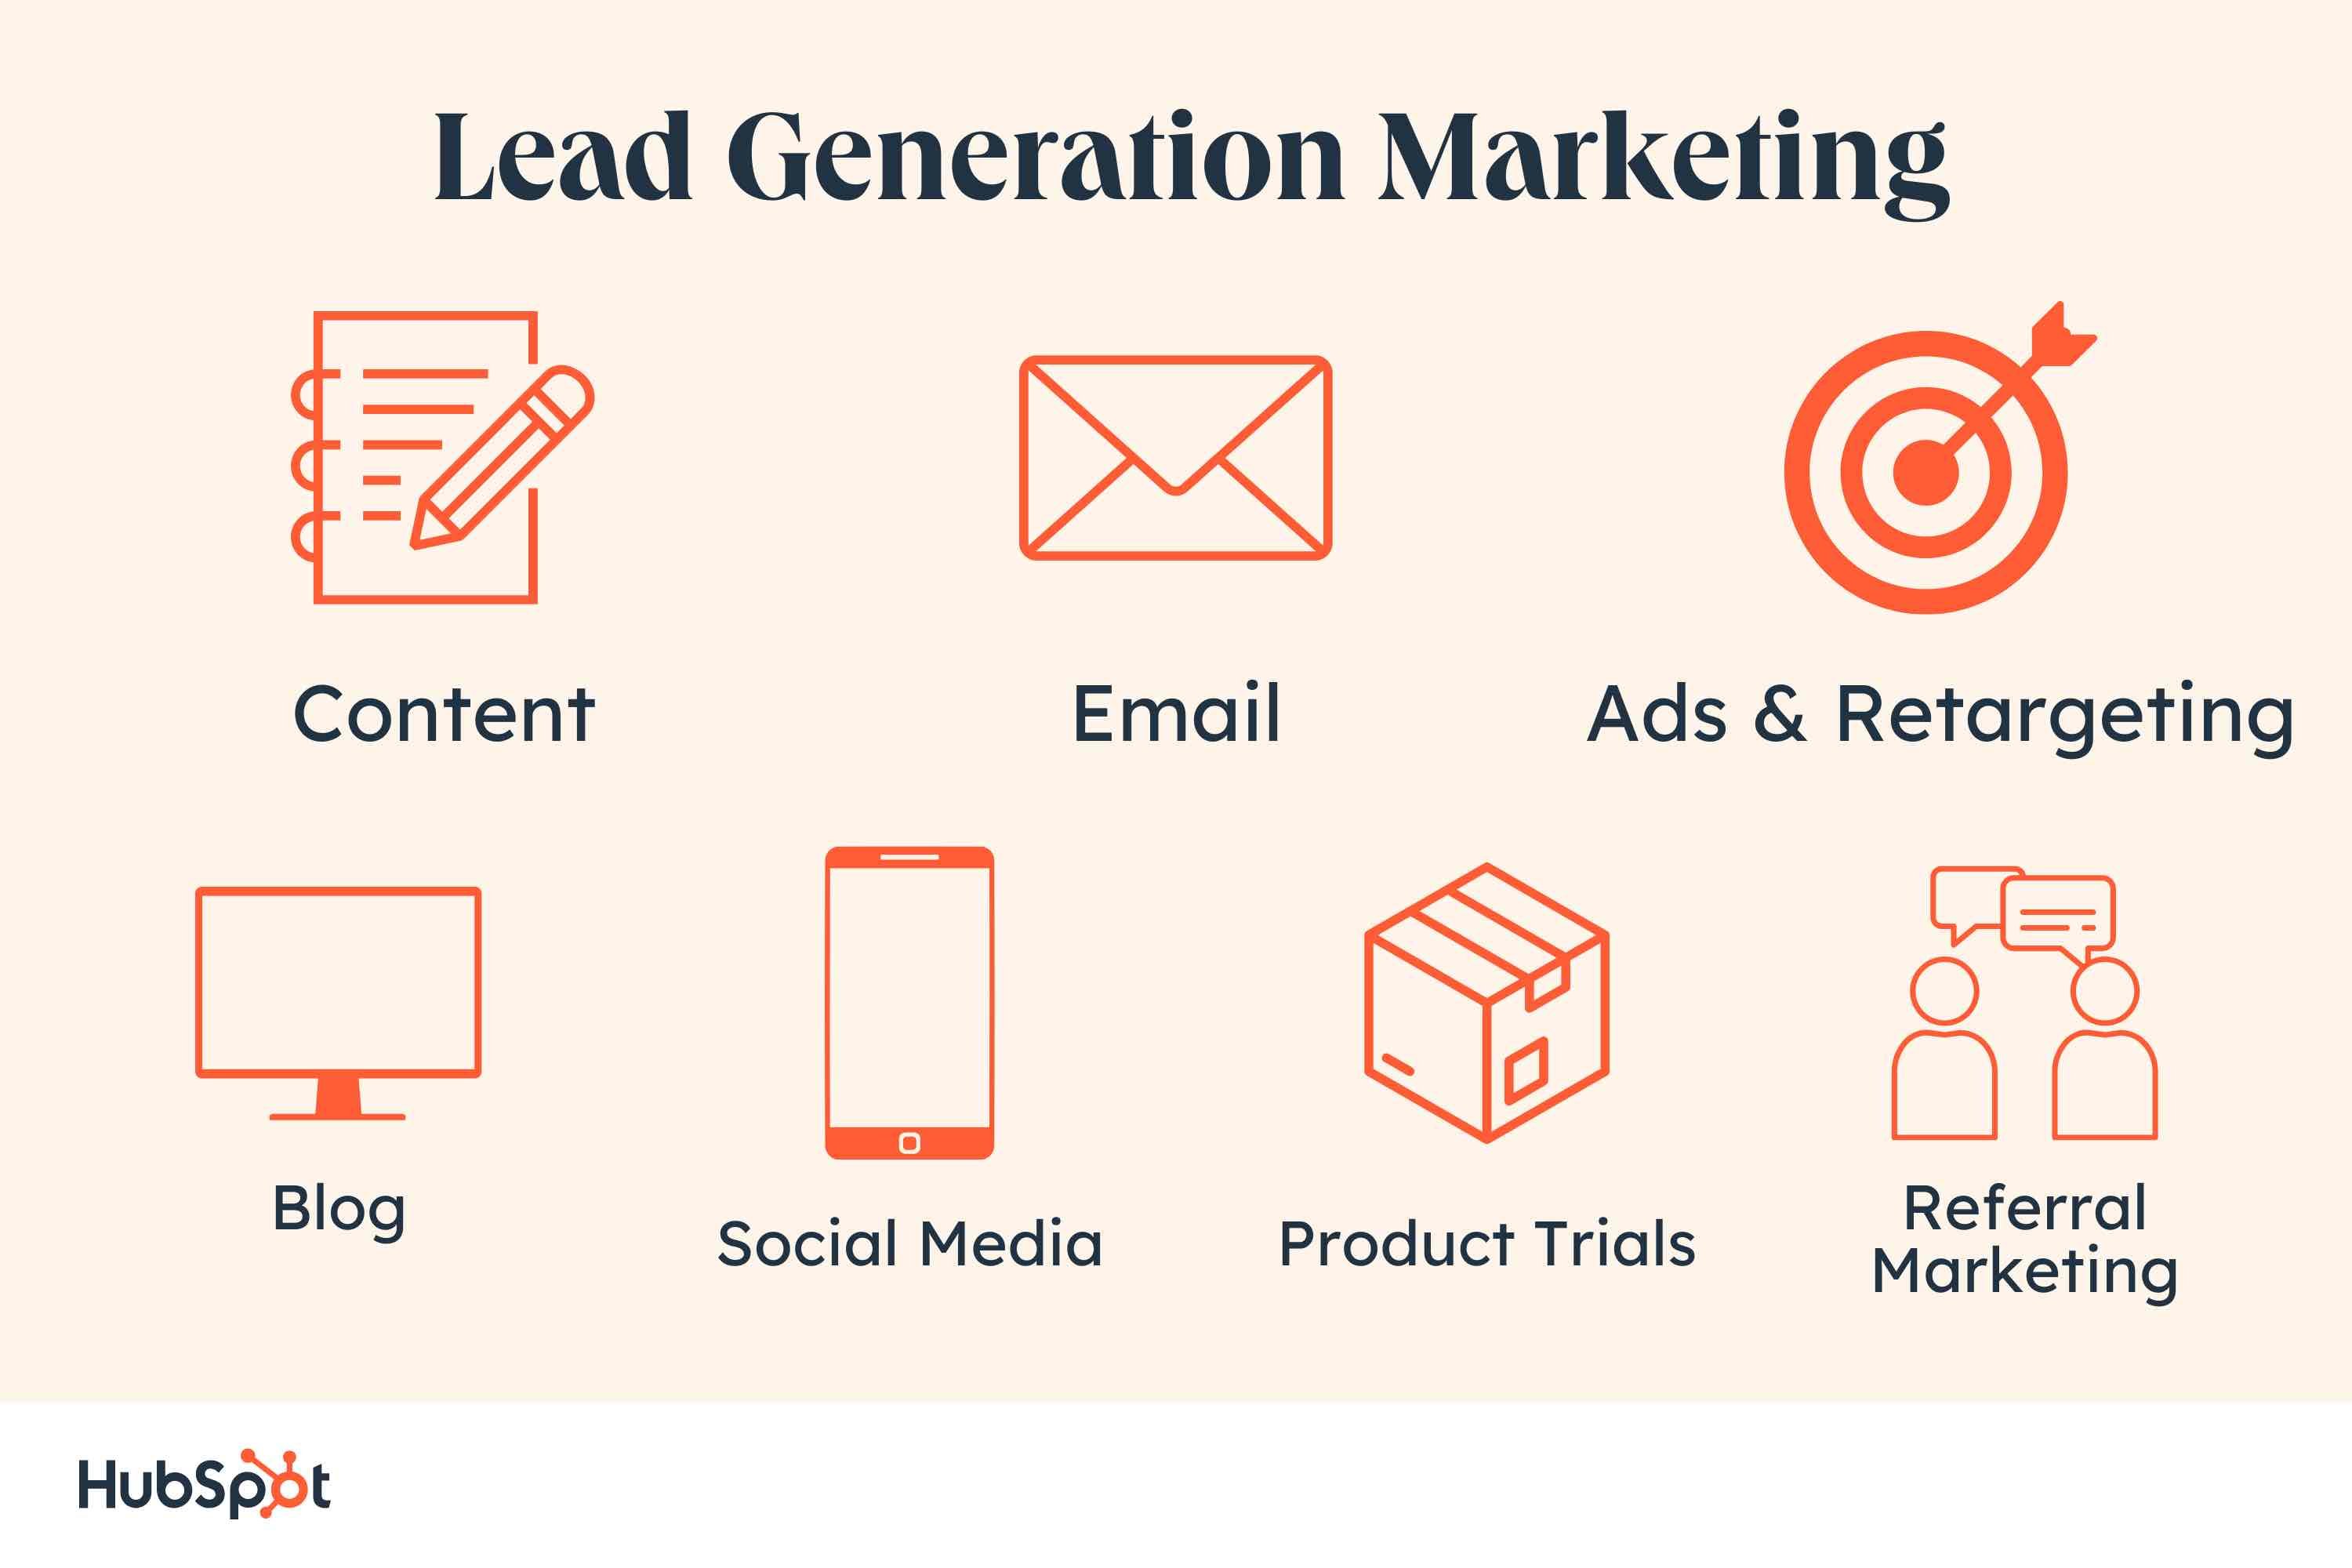 Lead Generation: A Beginner's Guide to Generating Business Leads the Way